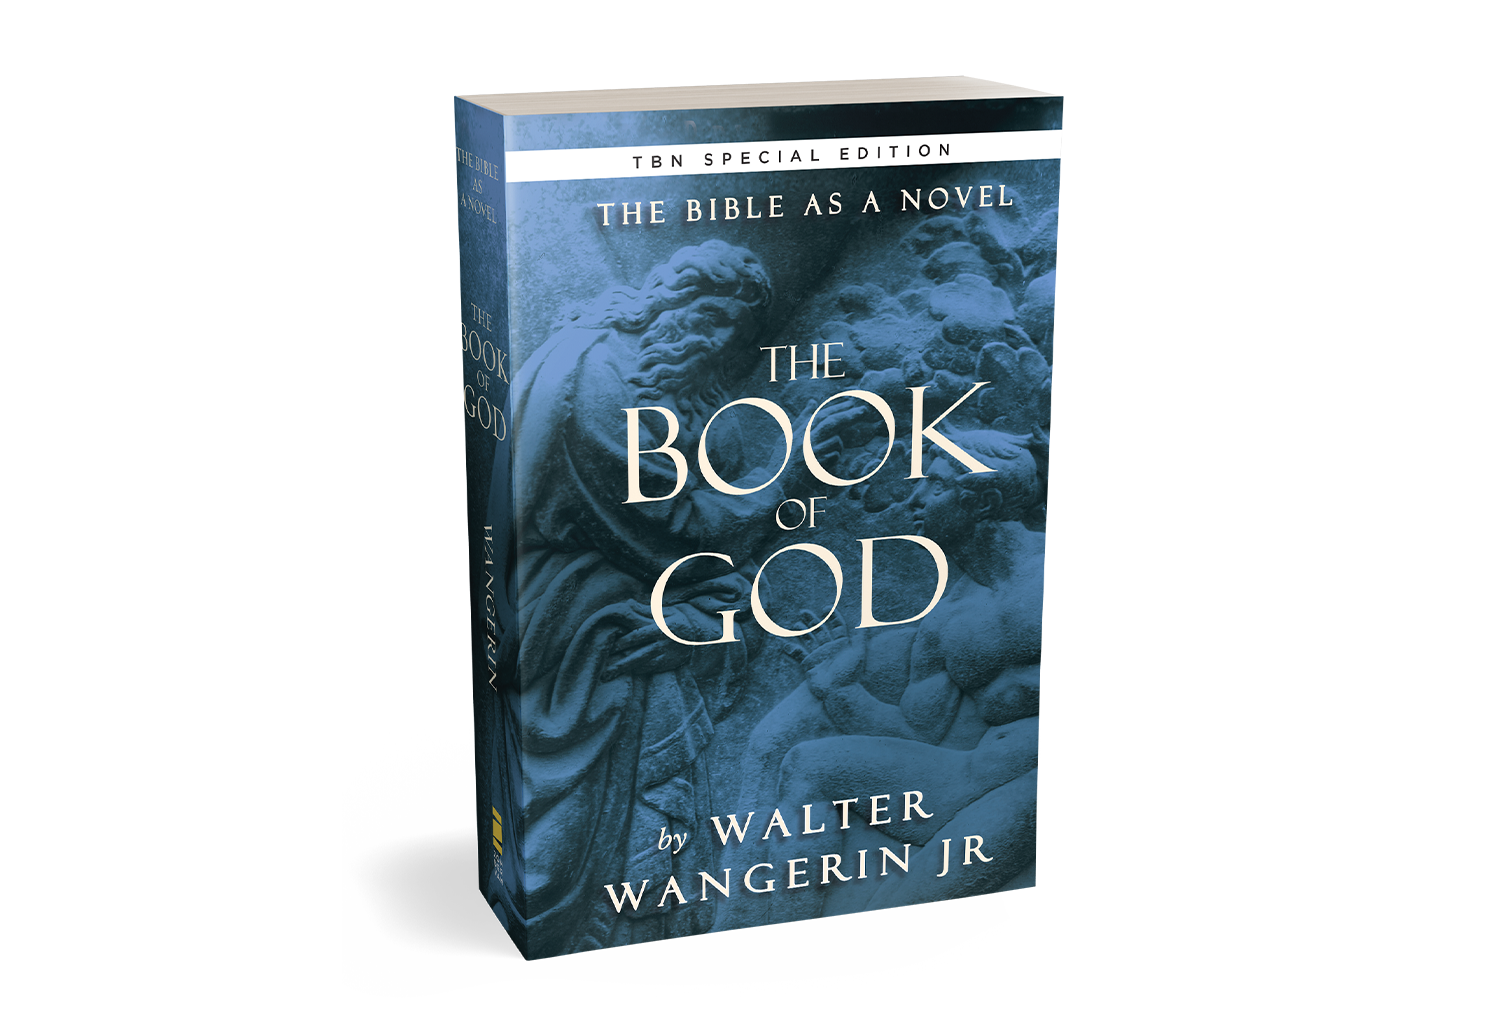 The Book of God by Walter Wangerin on TBN